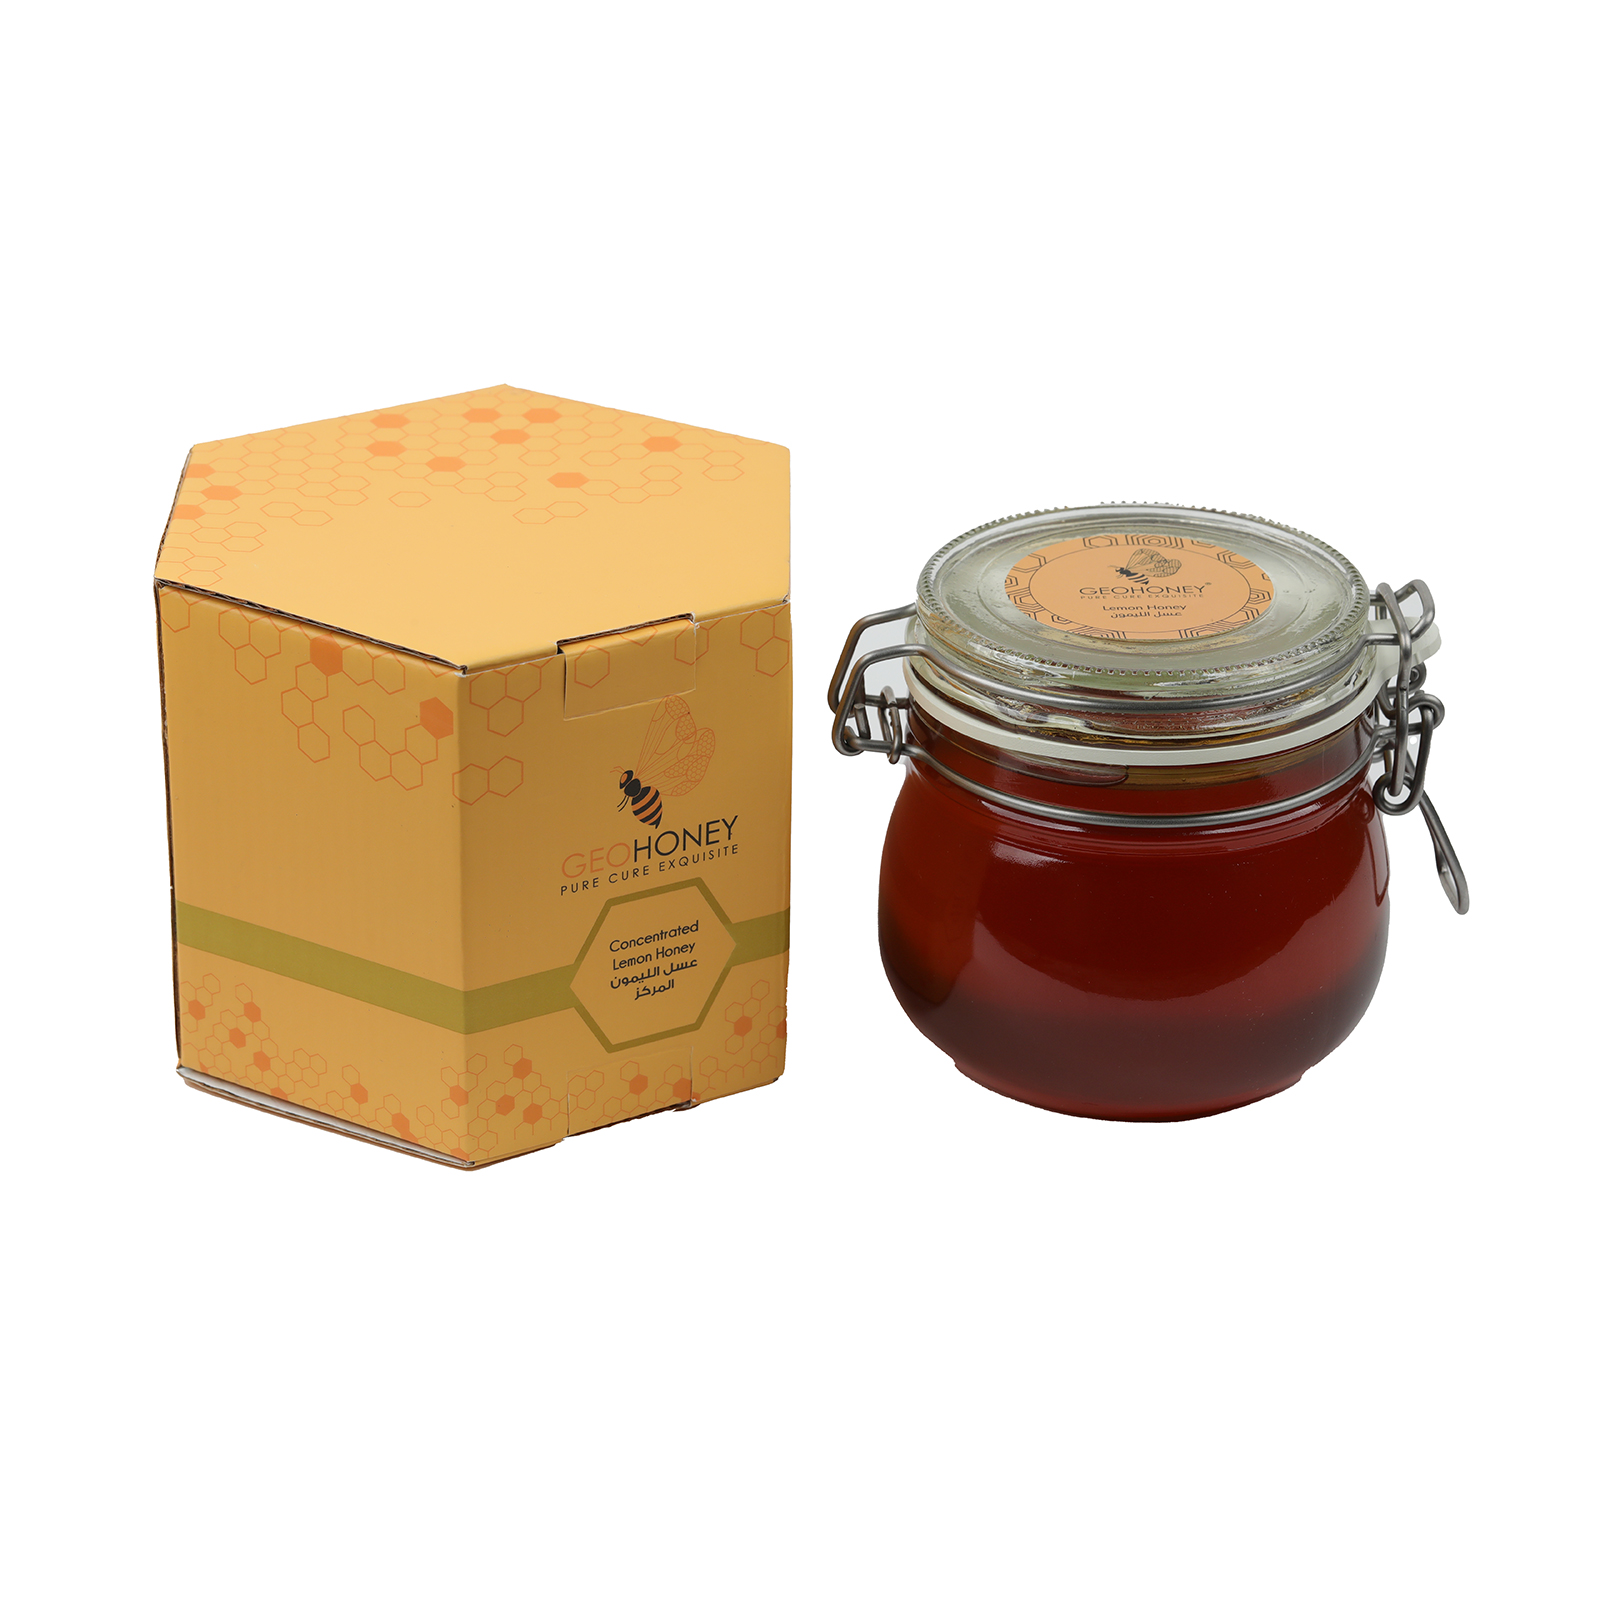 Lemon Honey Concentrated - 700gm